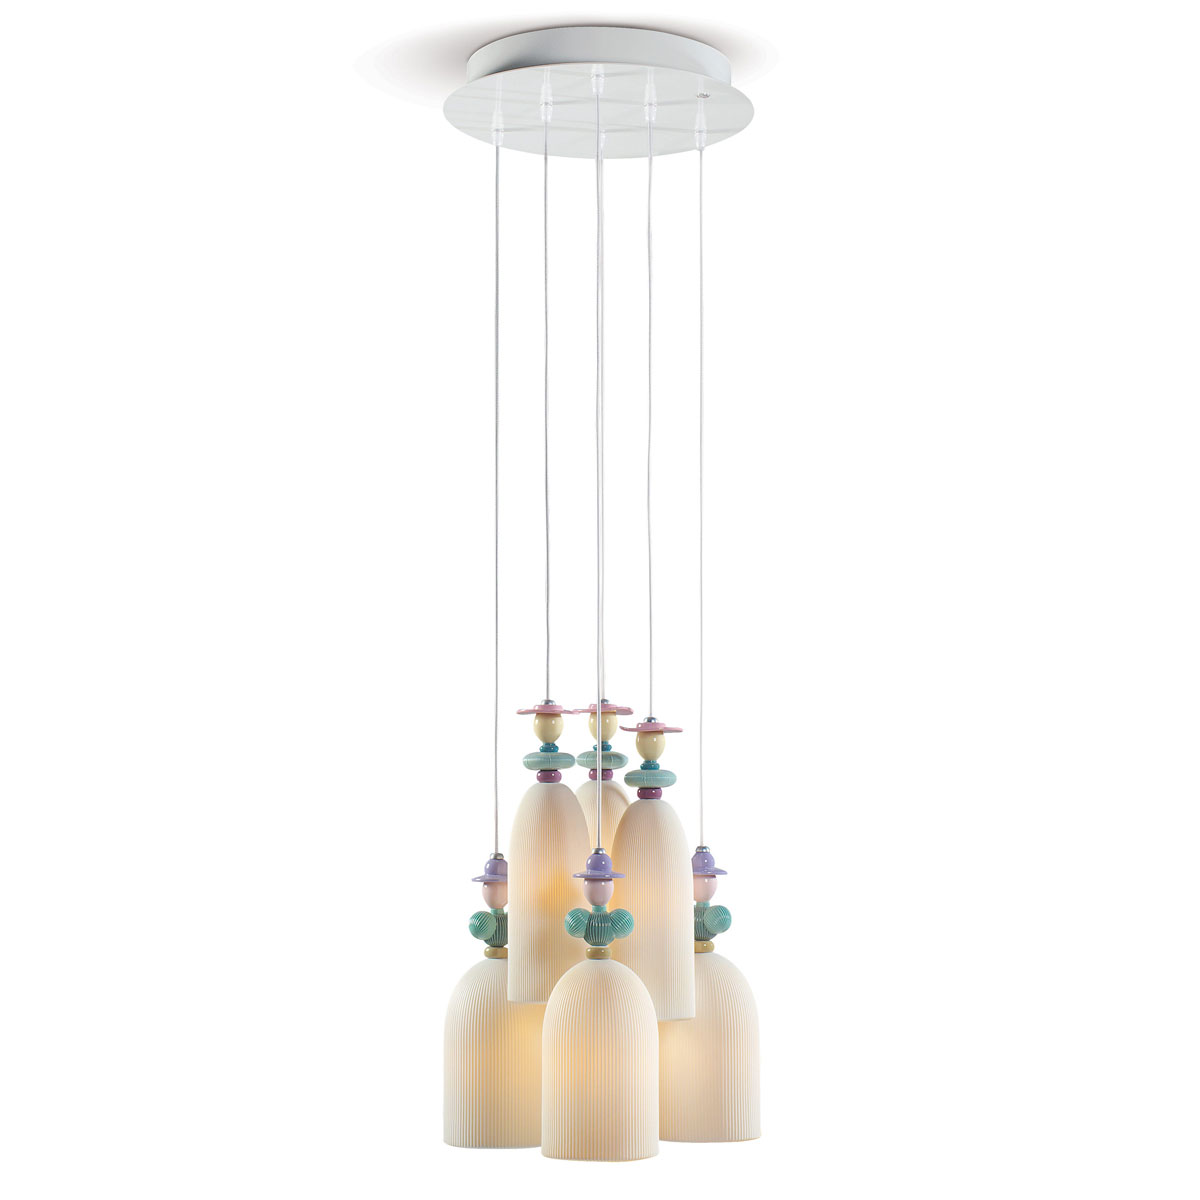 Lladro Classic Lighting, Mademoiselle 6 Lights Gathering In The Lawn Ceiling Lamp